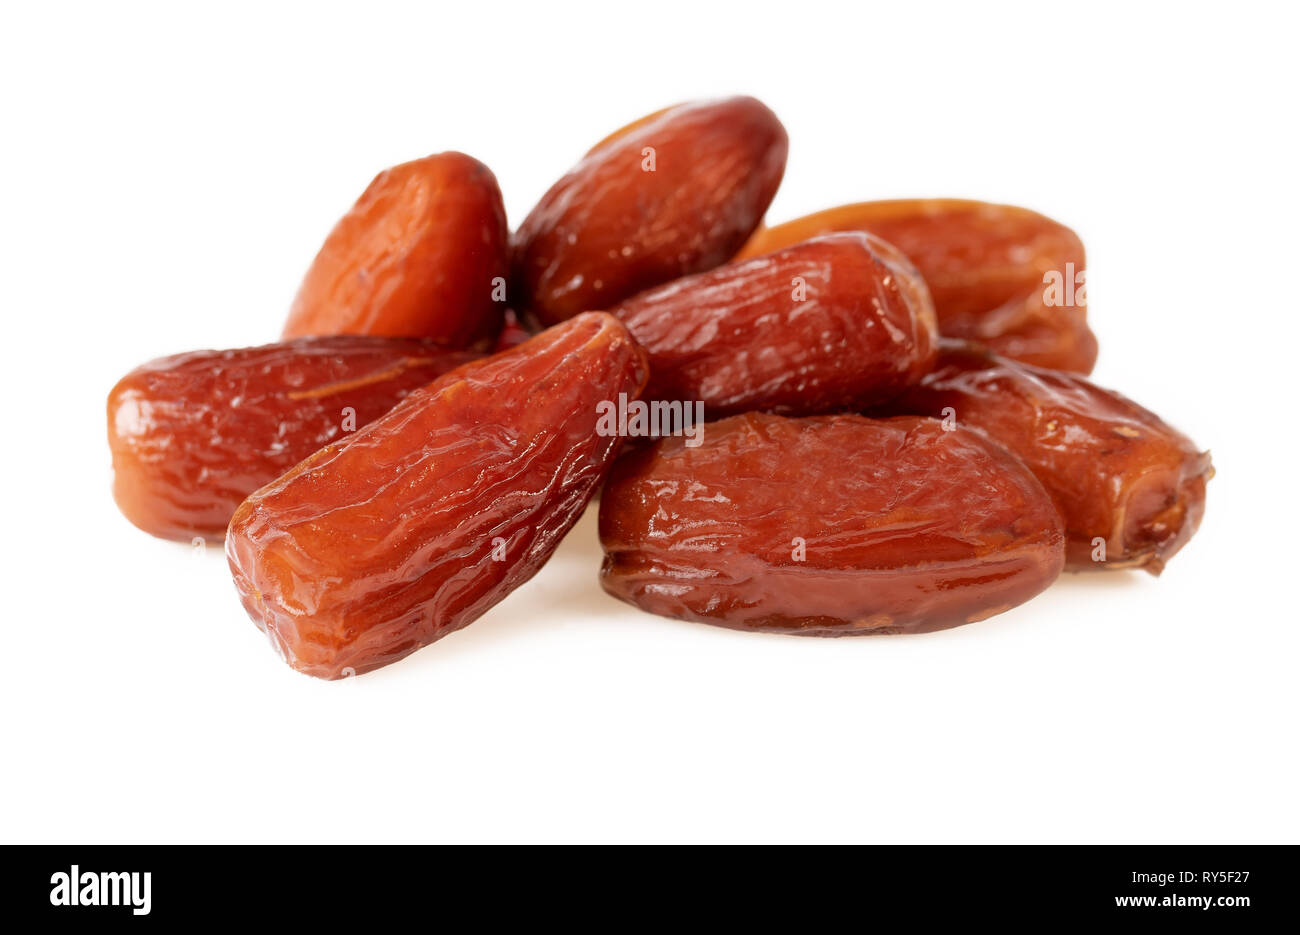 Dates Fruit. Pile of Dried Dates On White Stock Photo